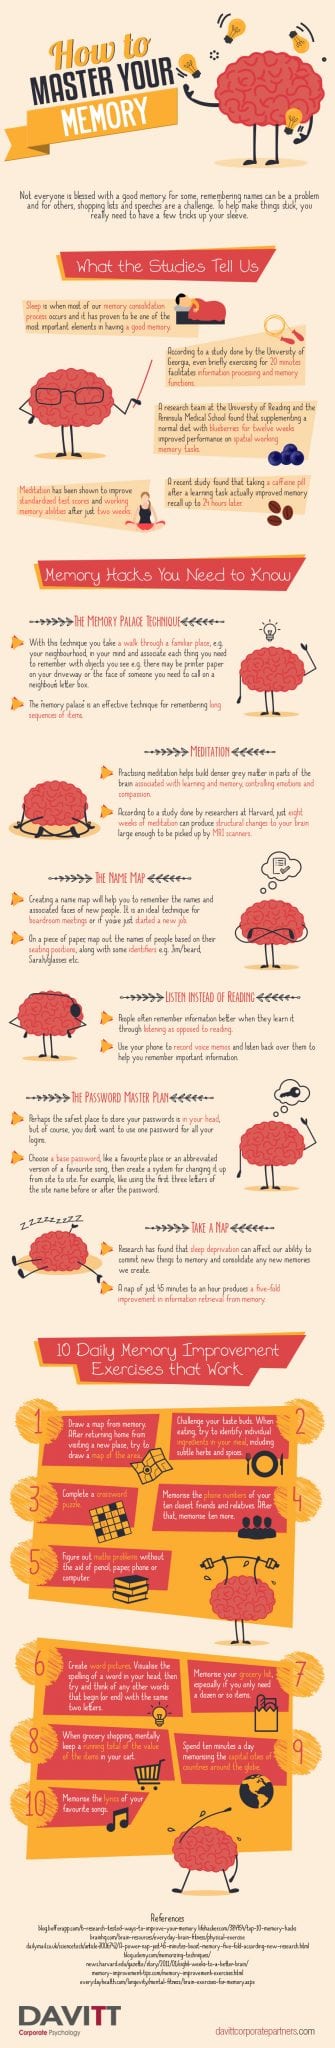 How-to-Master-Your-Memory-Infographic